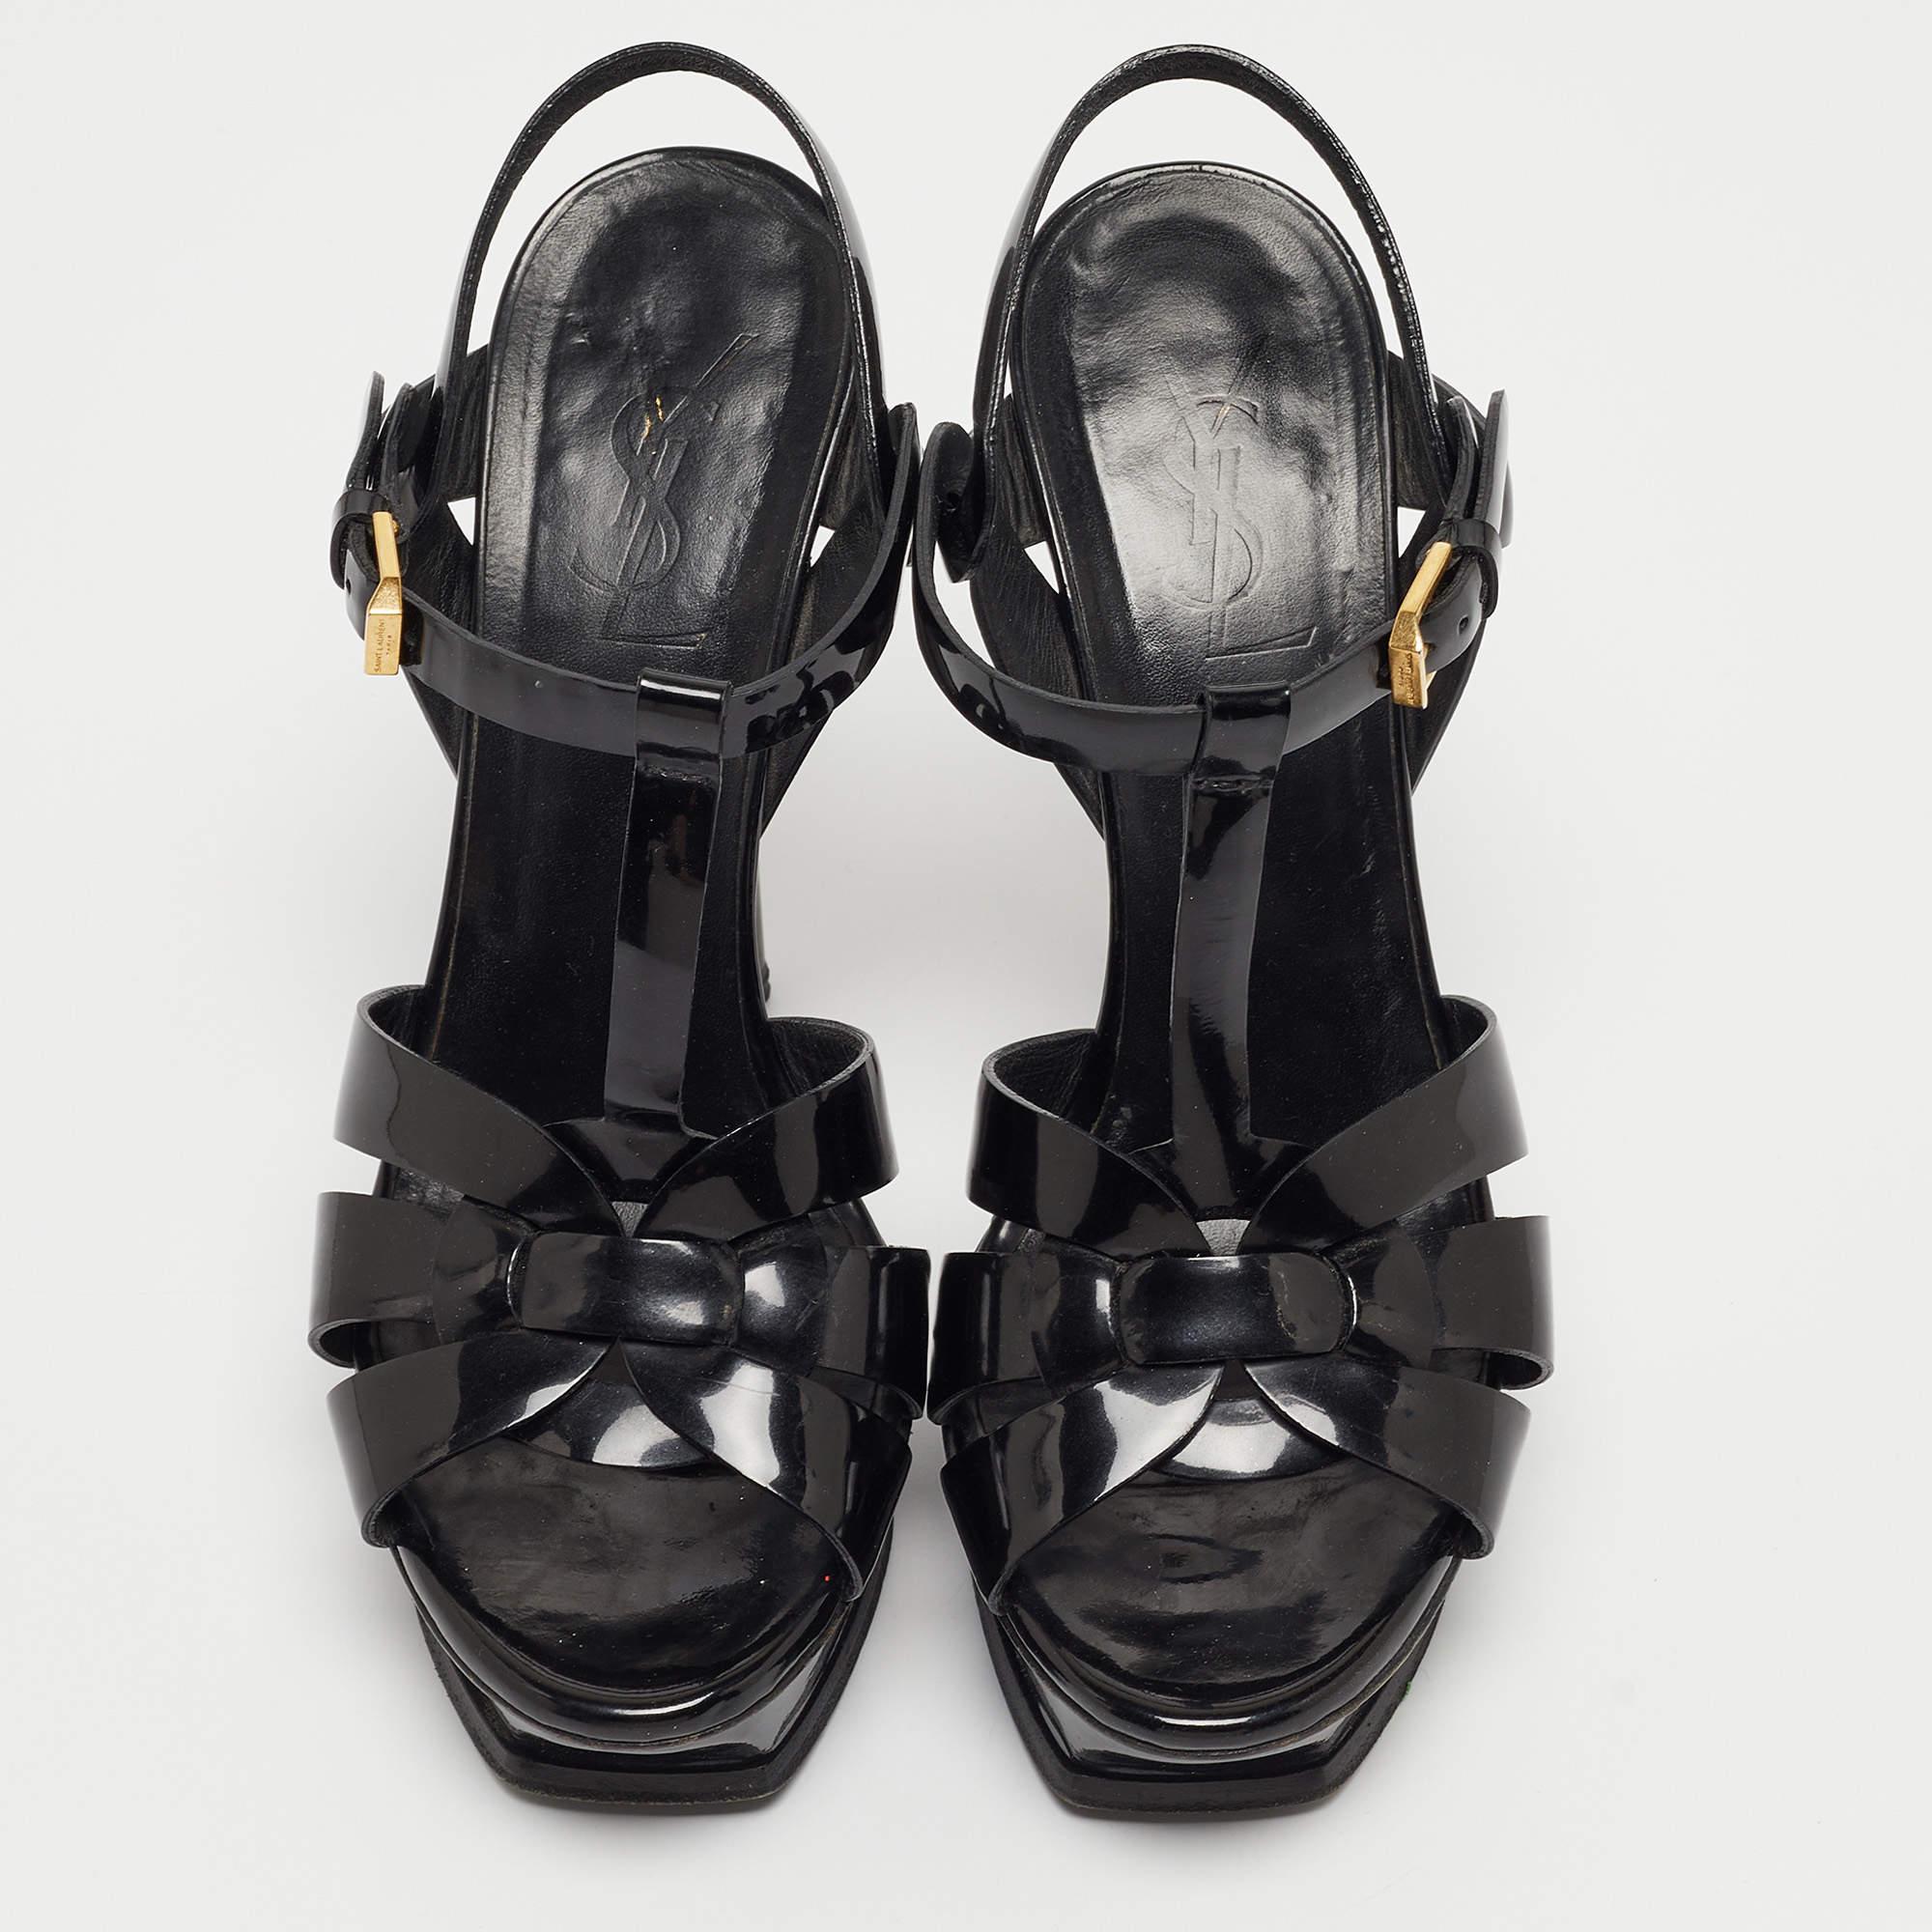 YSL brings you the perfect pair of sandals to celebrate the season in. Crafted from patent leather, these sandals are comfortable and easy to flaunt.

